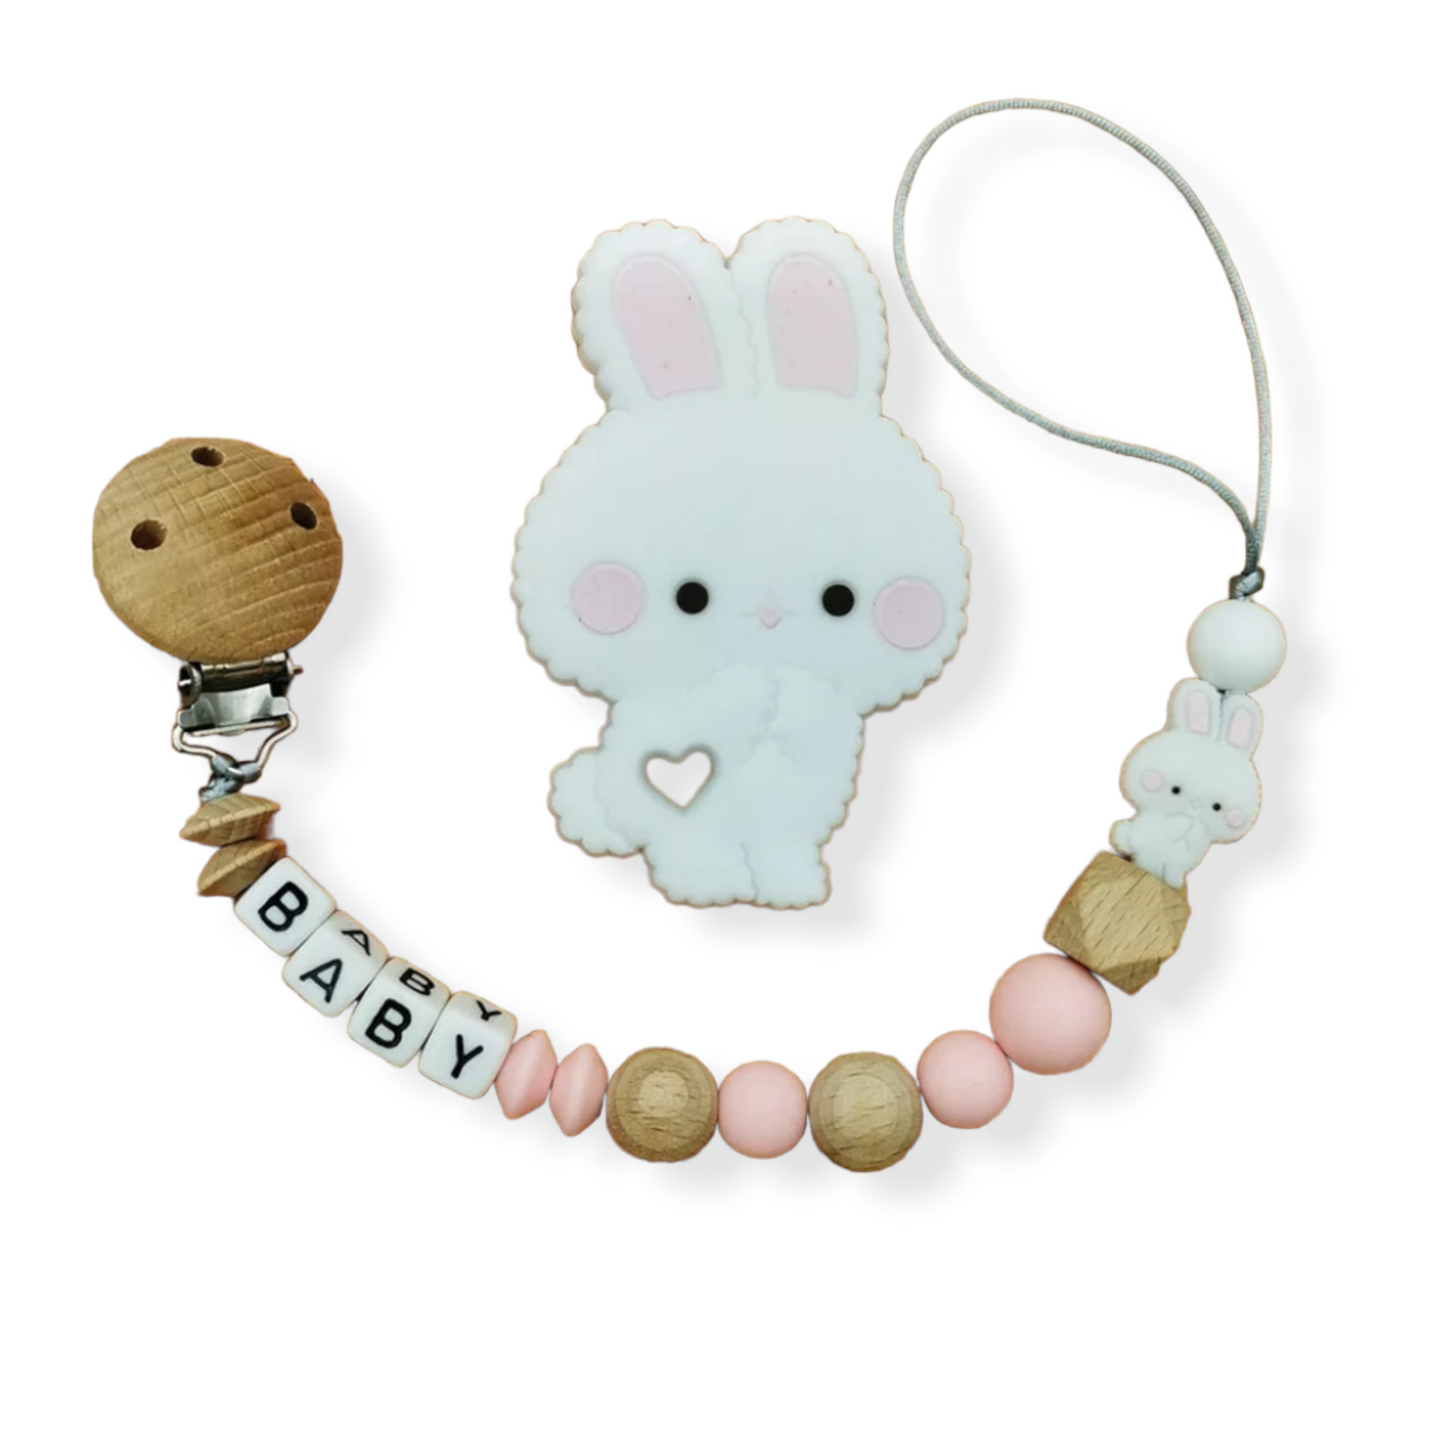 Pink wooden and silicone customizable pacifier clip with baby's name and bunny teether set